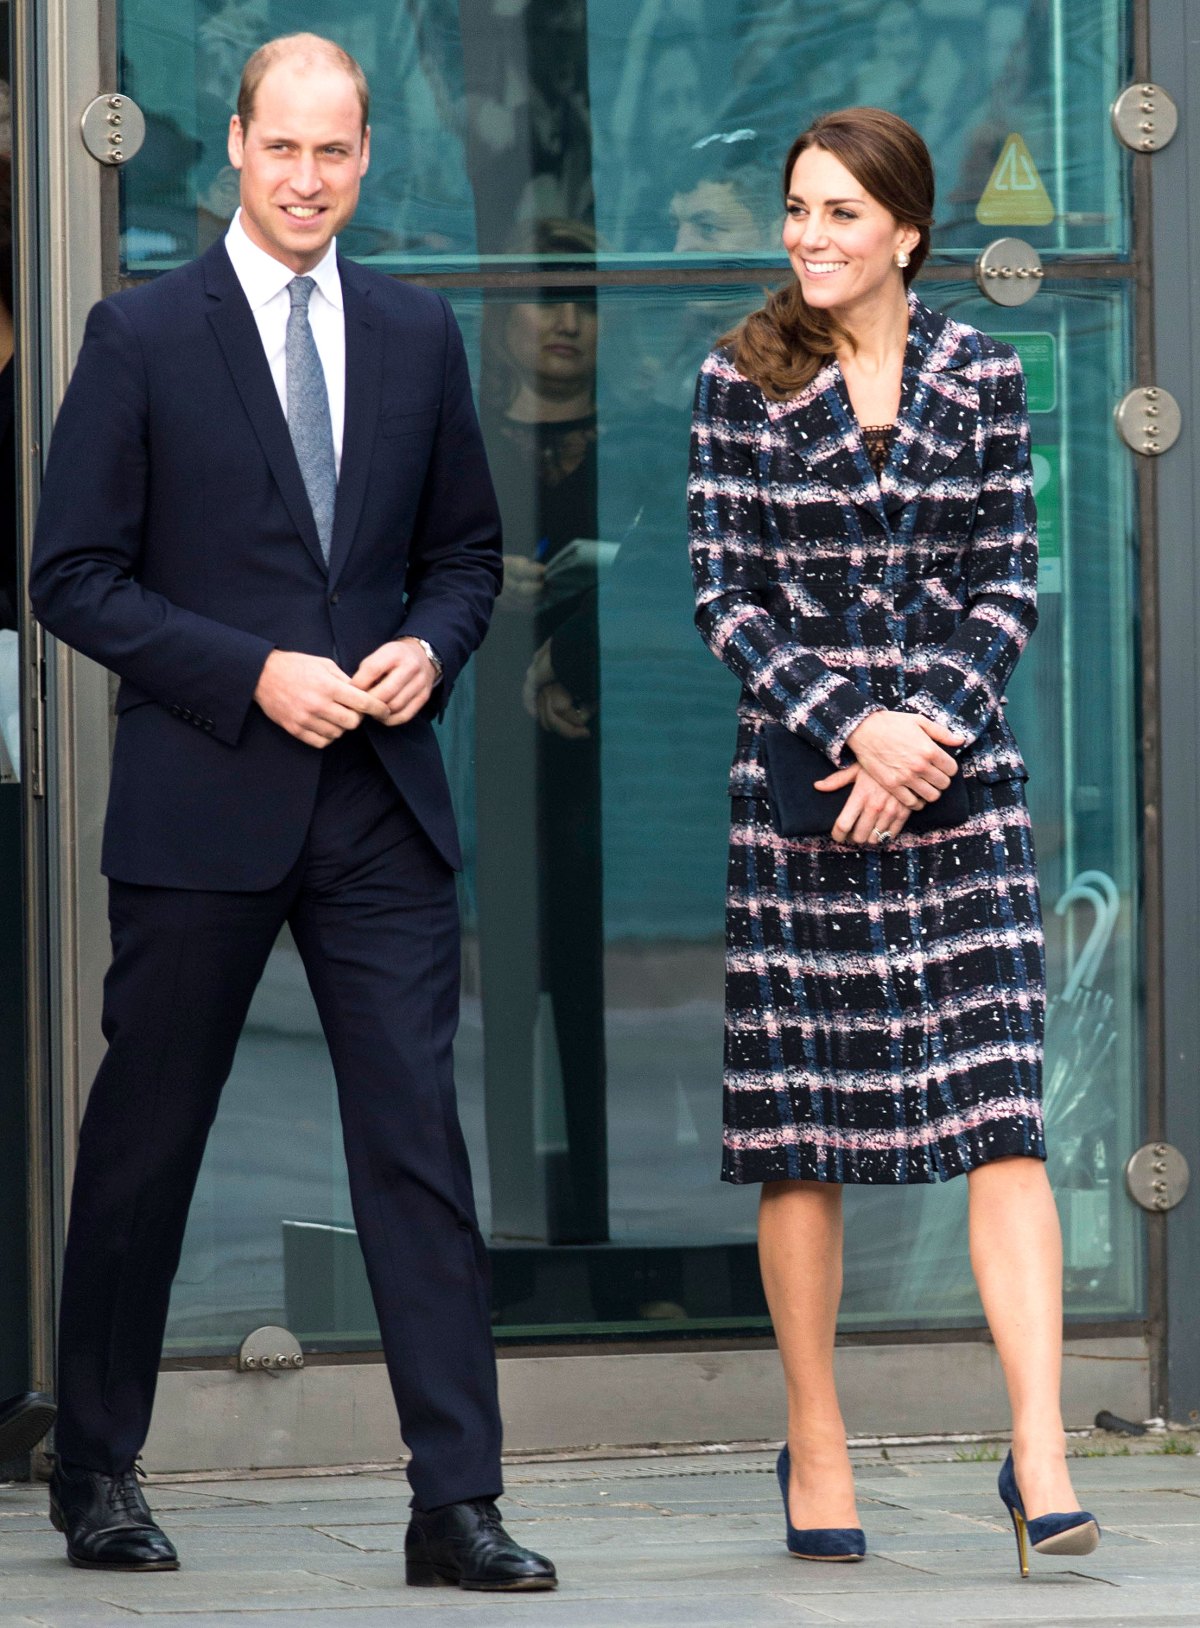 Duchess Kate Brings Back the Topsy Tail '90s Hairstyle: Pics